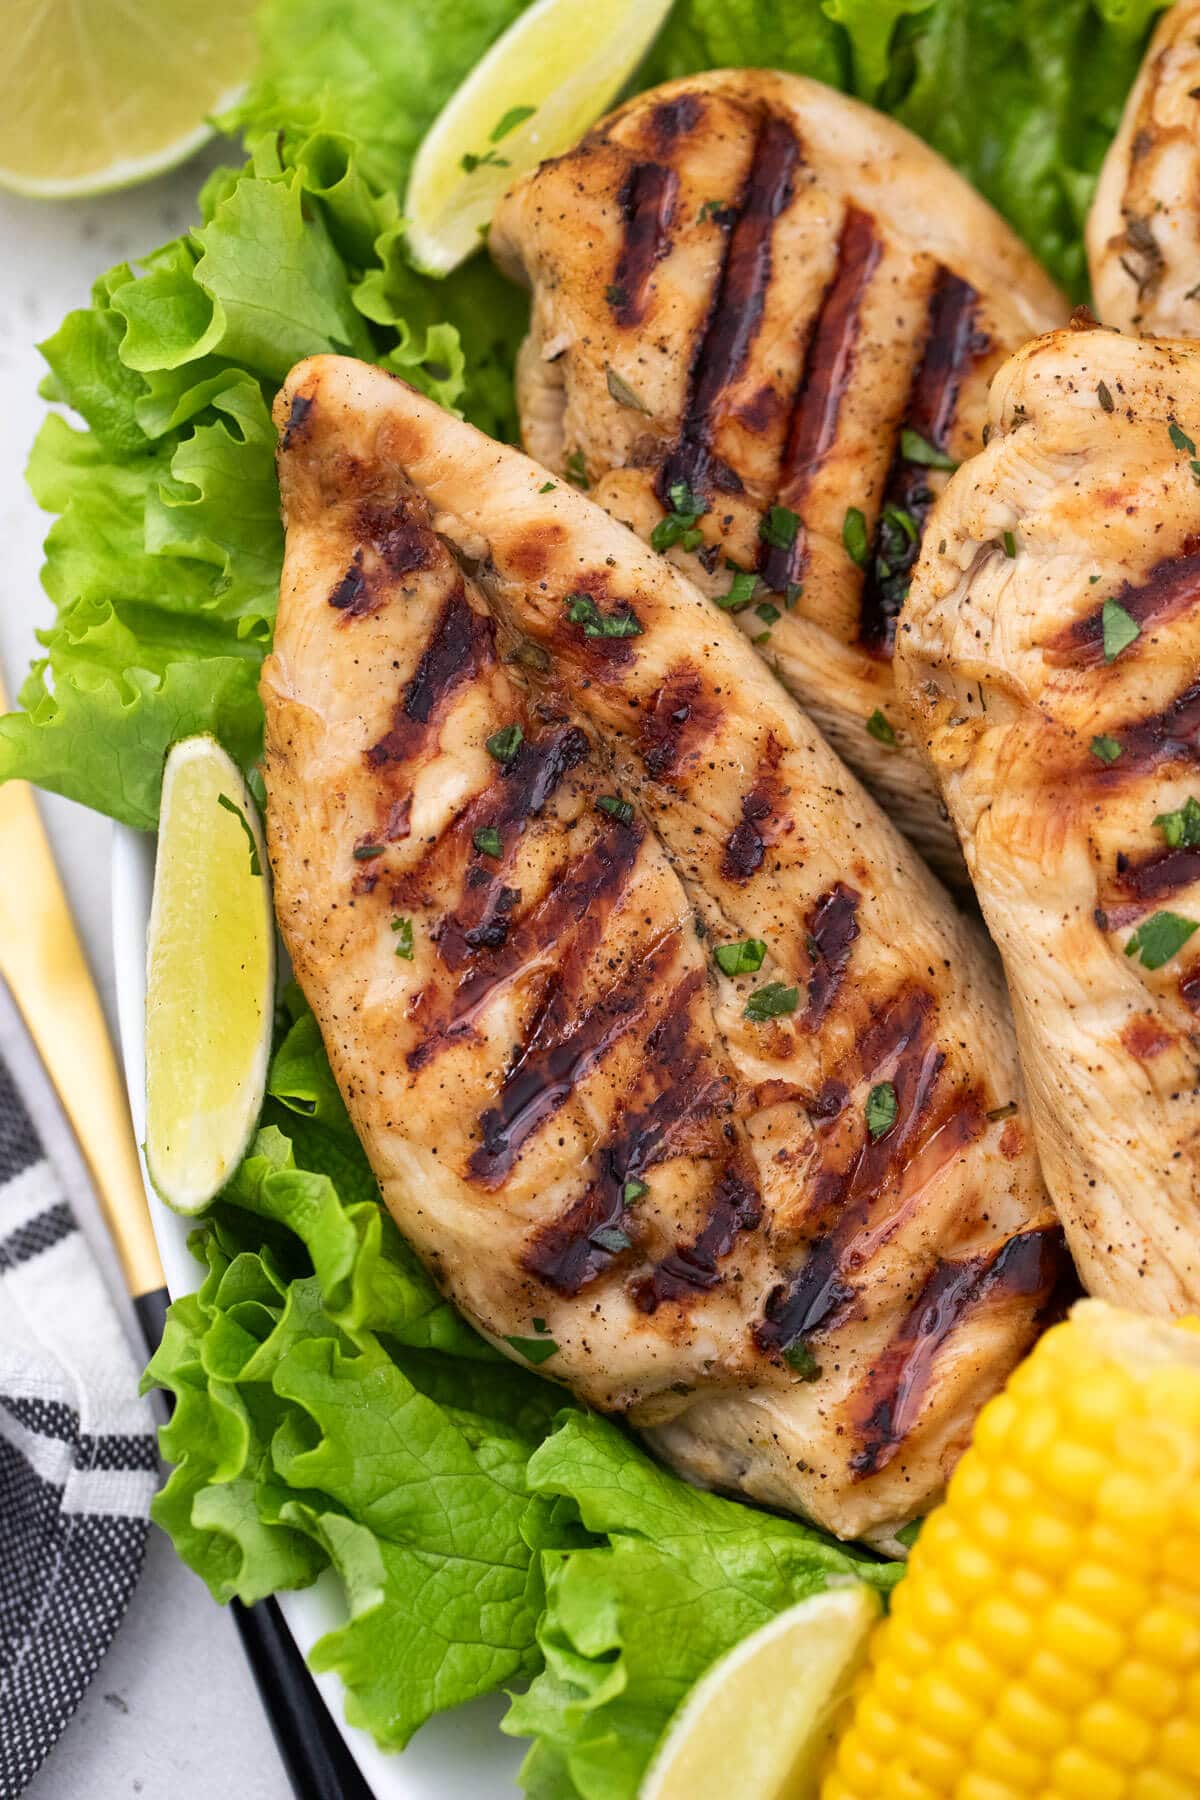 grilled chicken breasts marinated in guinness beer on a bed of lettuce.